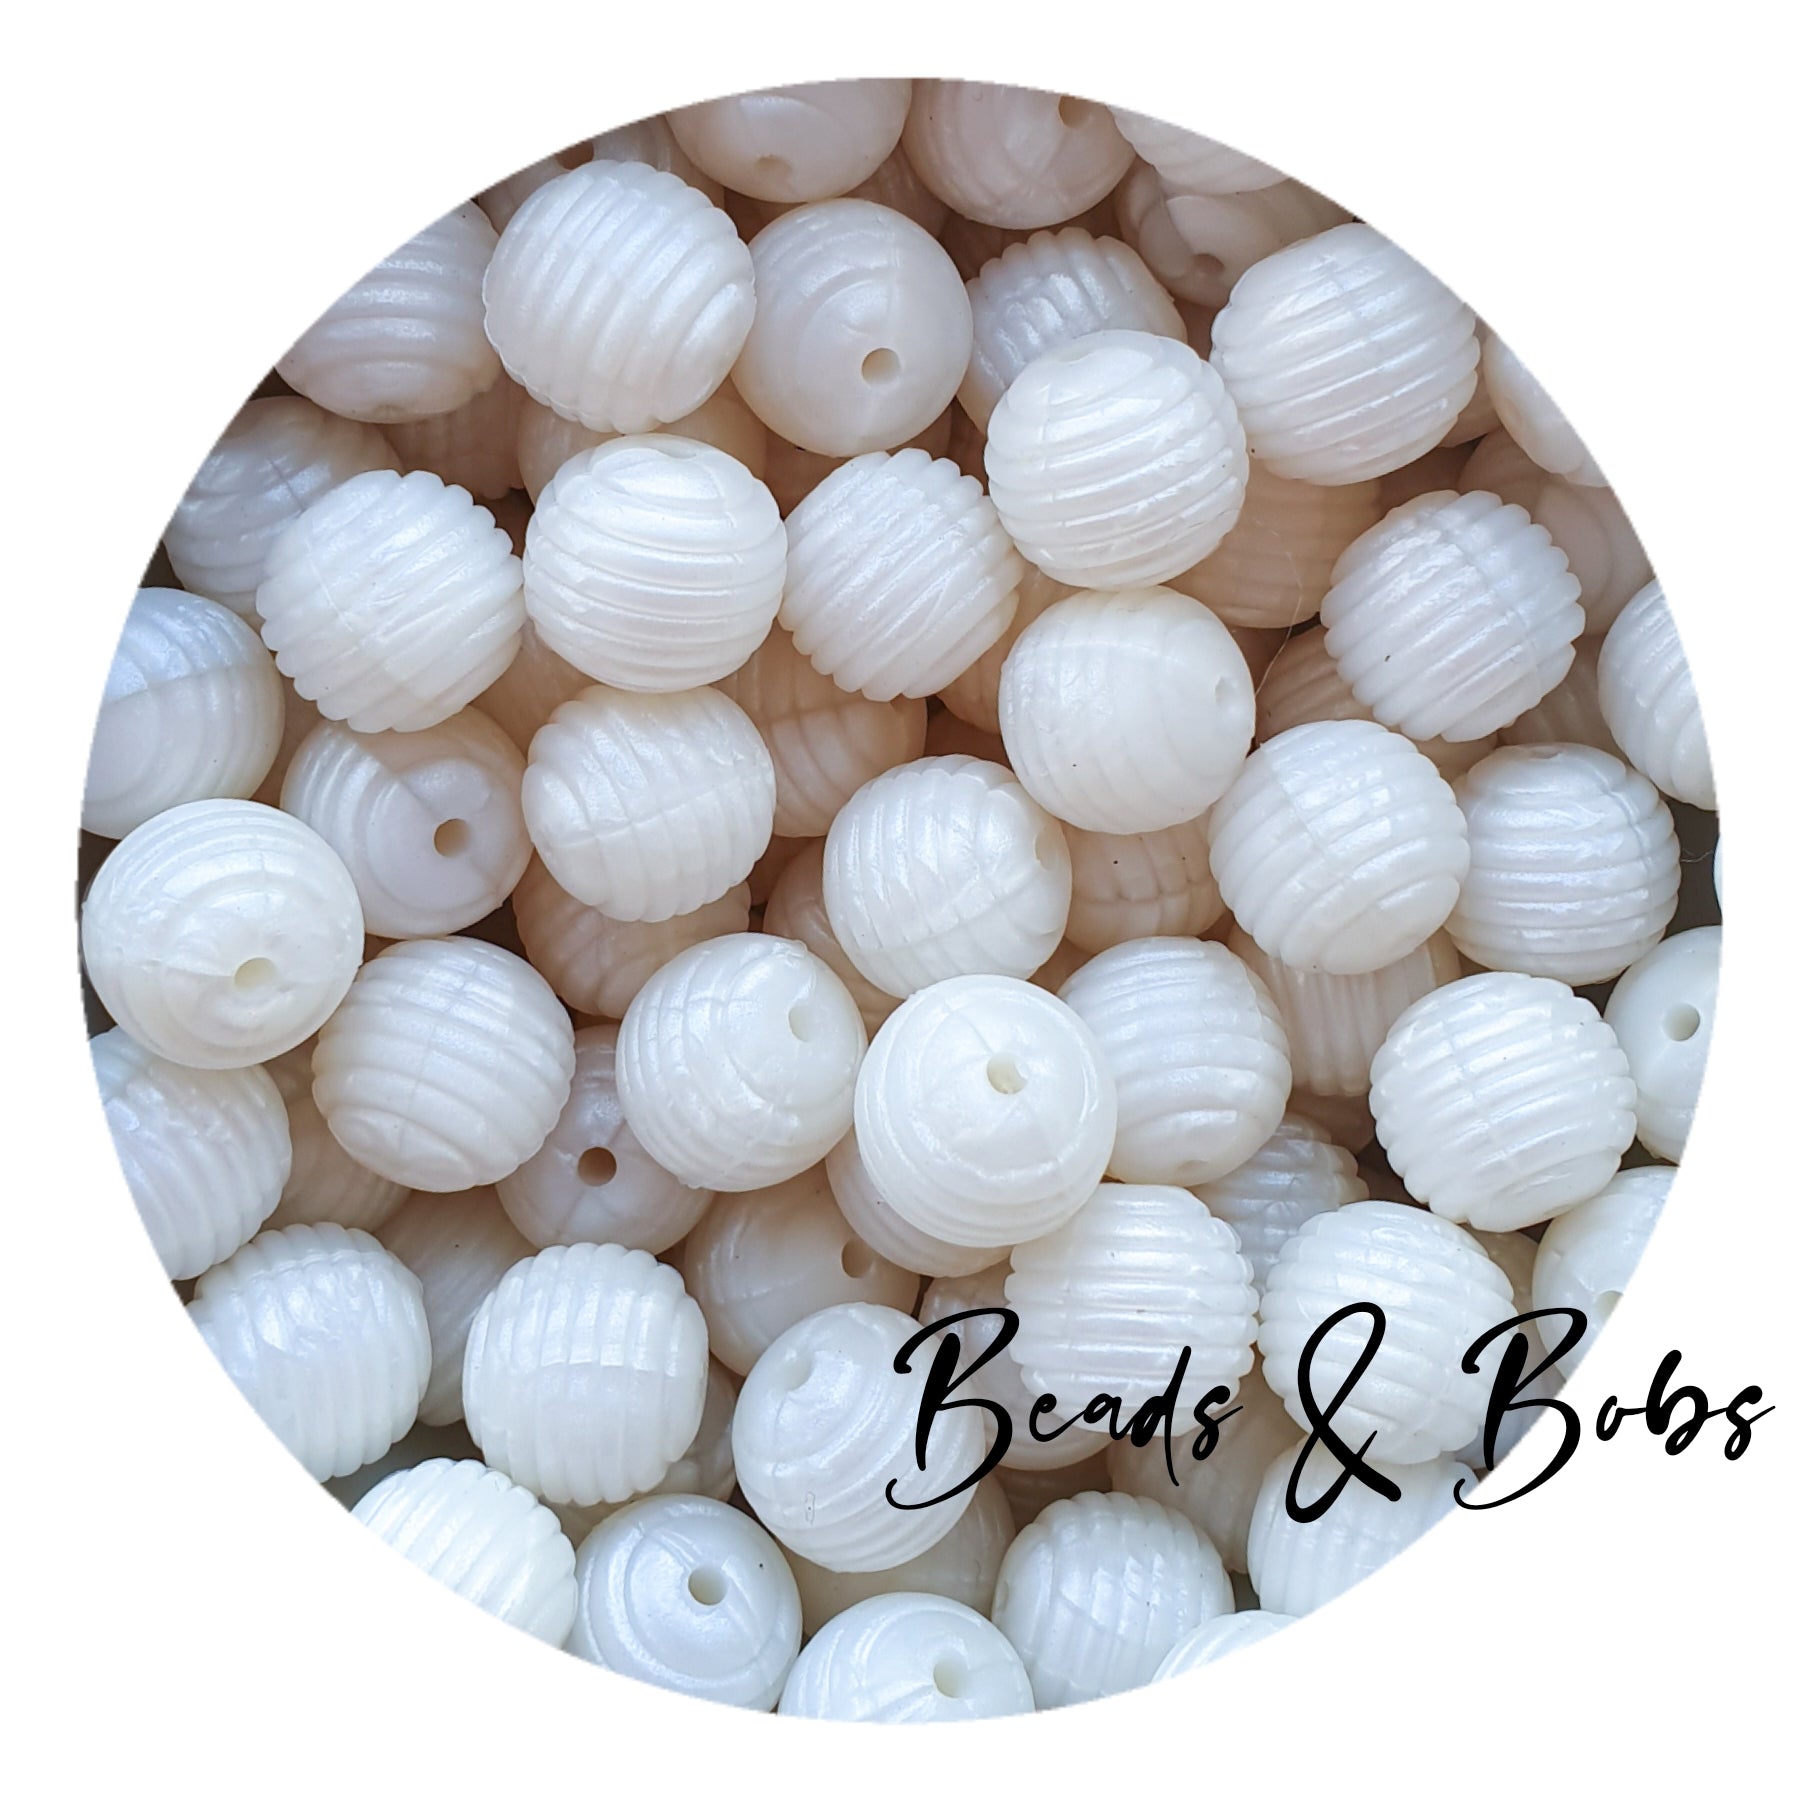 15mm Pearl White Silicone Beads, White Round Silicone Beads, Beads Wholesale